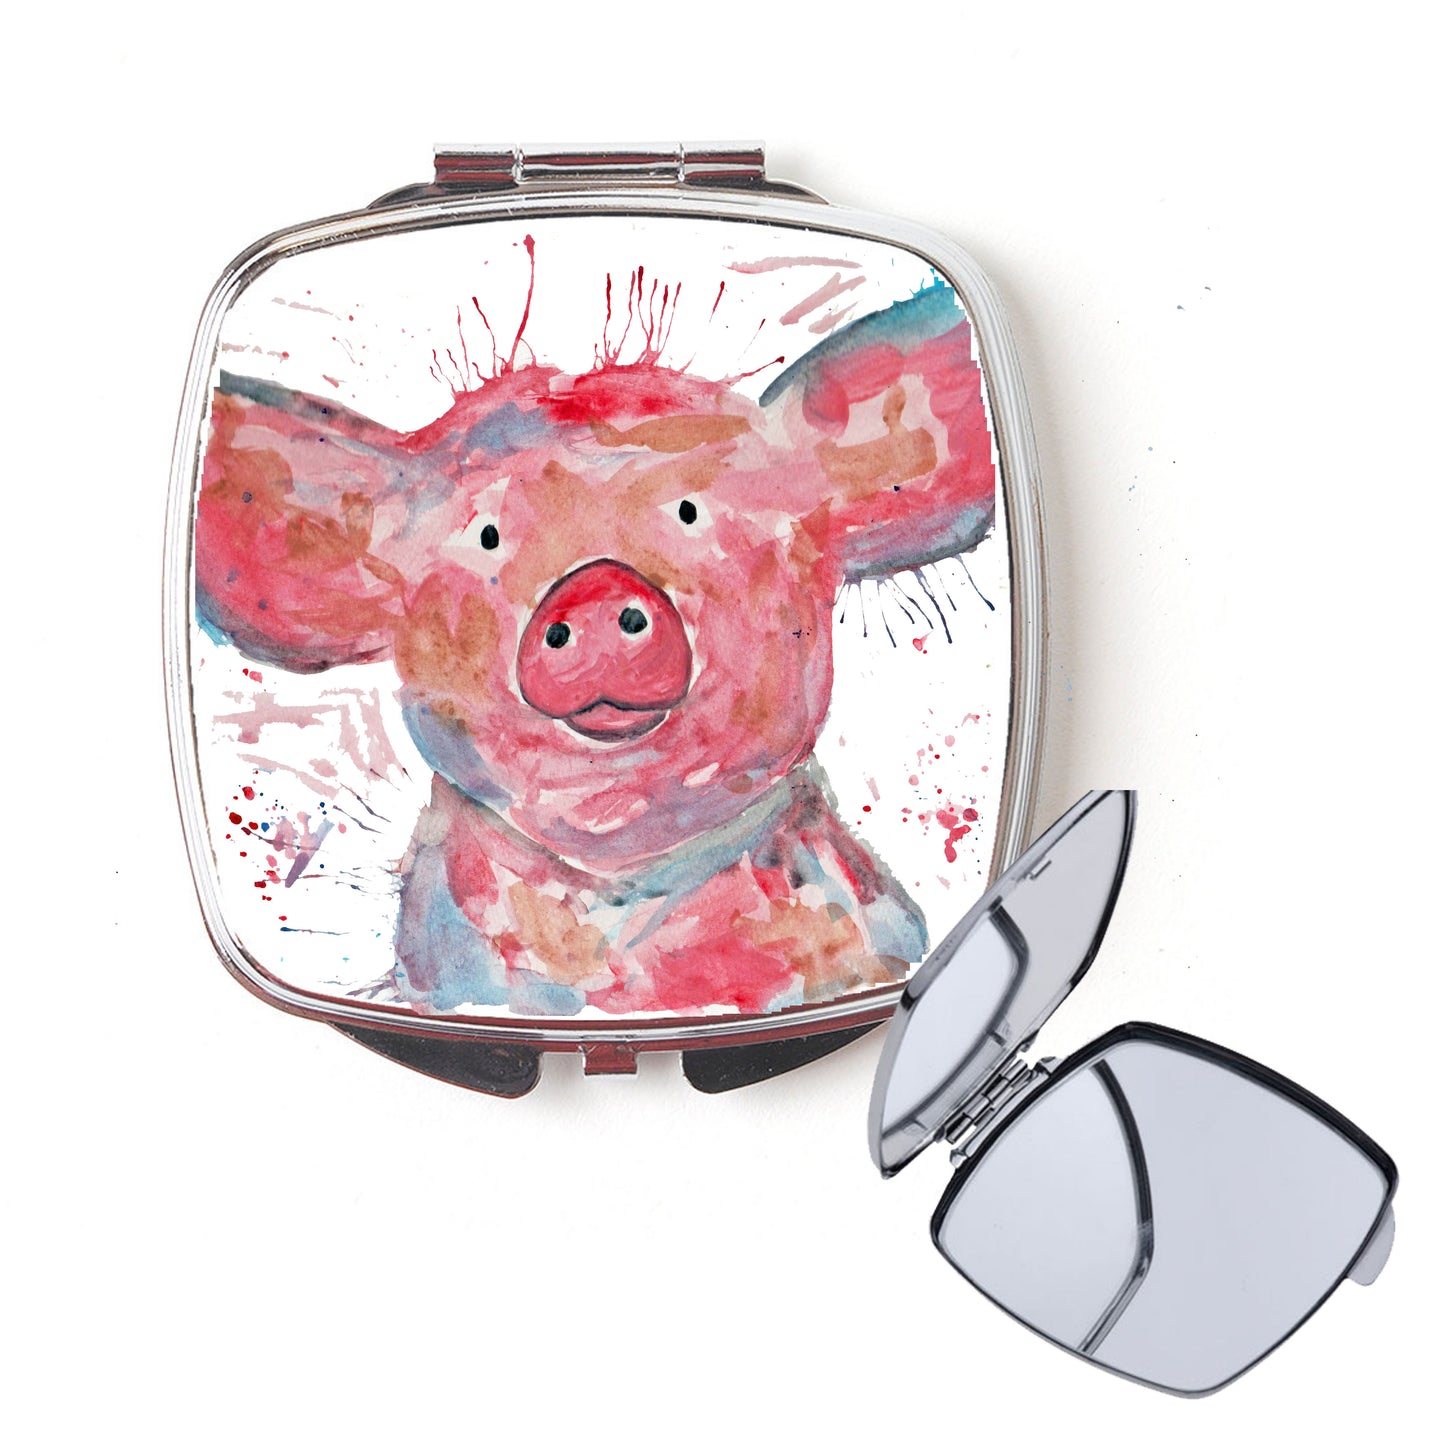 Pig compact mirror